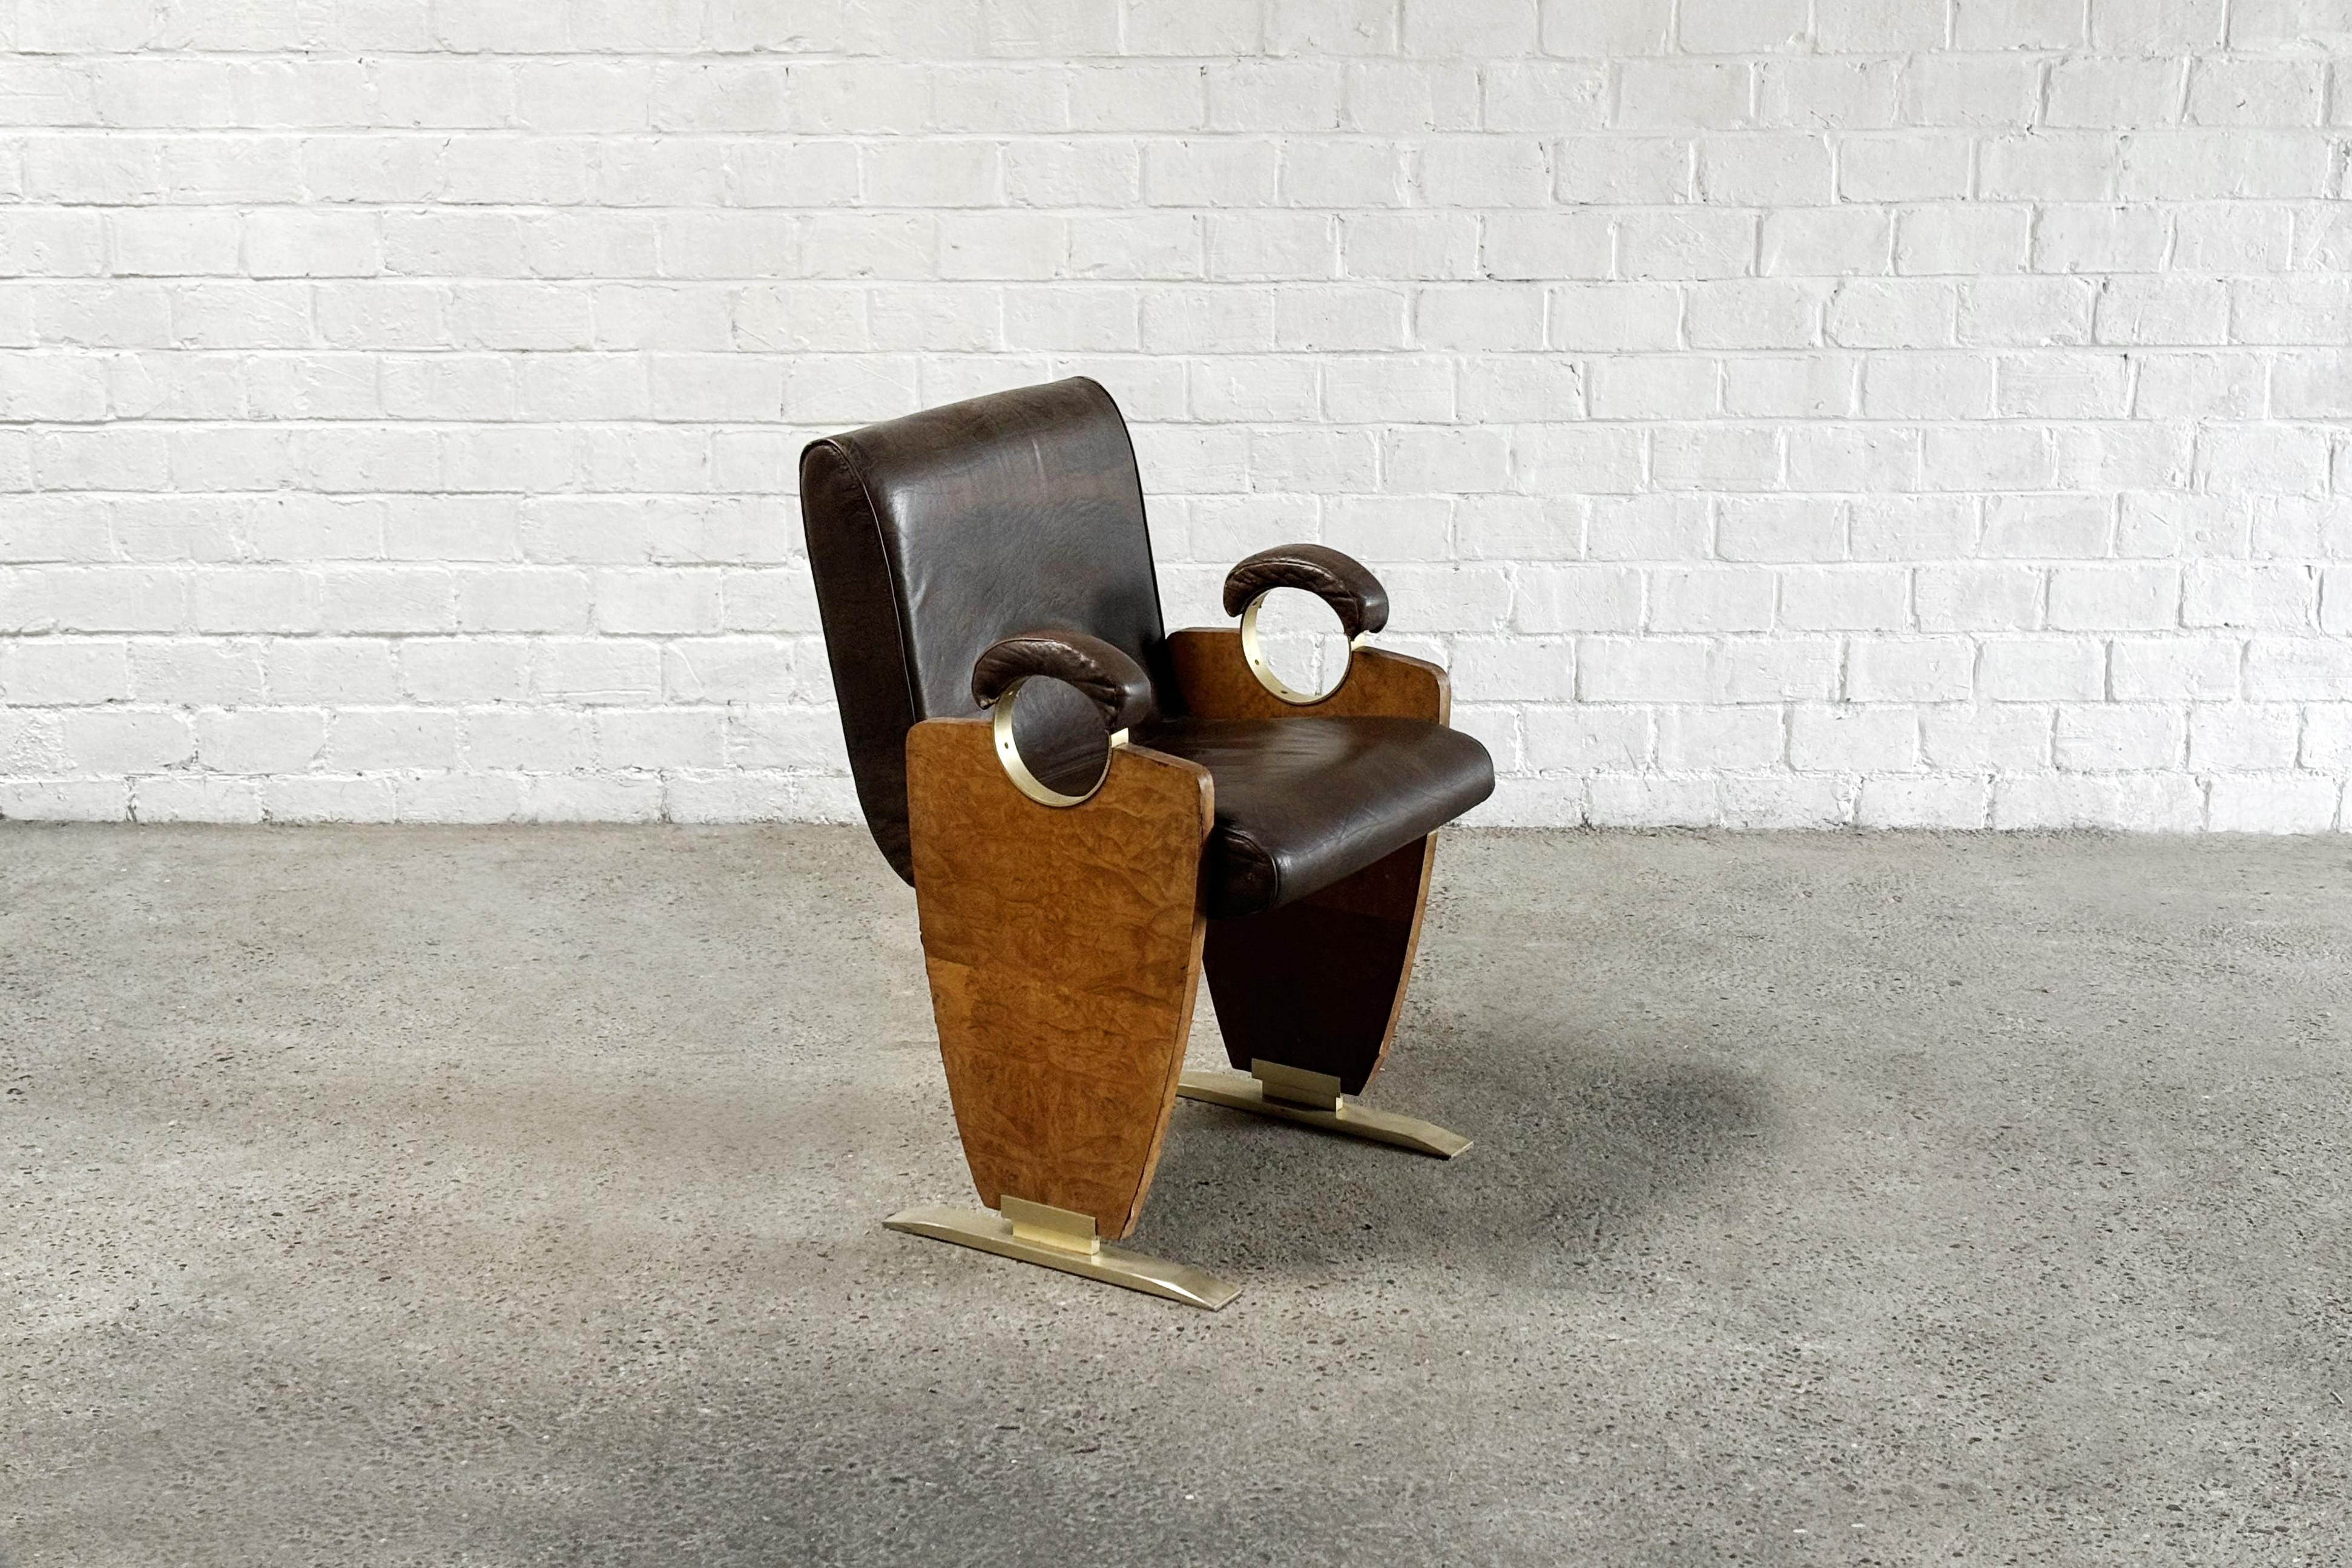 A peculiar wooden lounge or side chair with skai leather upholstery in Art Deco style, 2nd half of the 20th century. The two round armrests and legs are covered with brass-colored metal accents. The wood is veneered with burl walnut wood. This is a